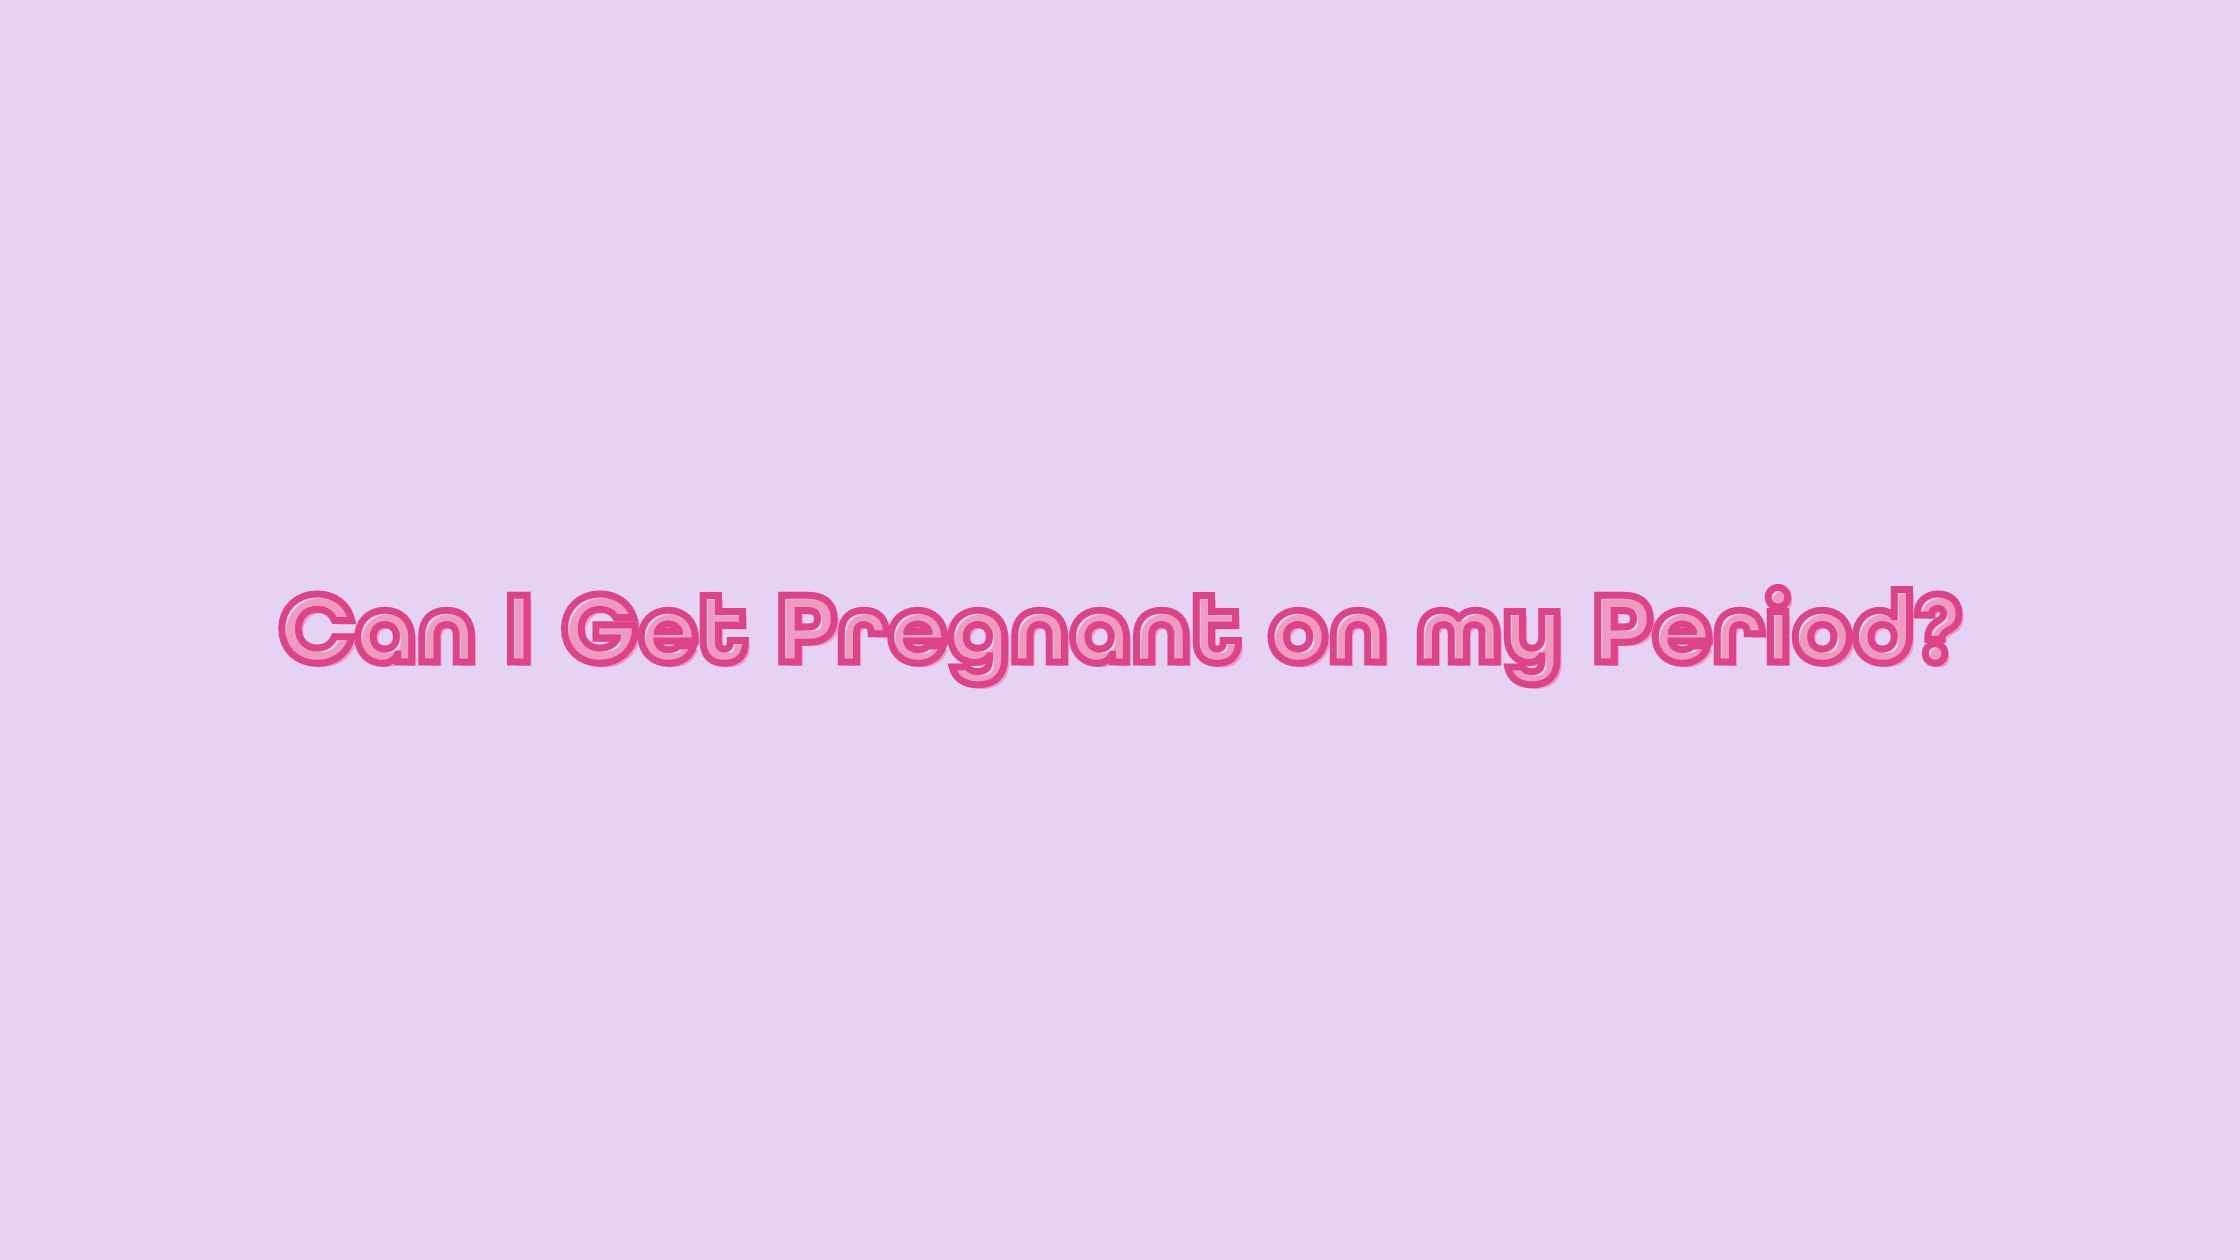 Why Am I Not Getting Pregnant?